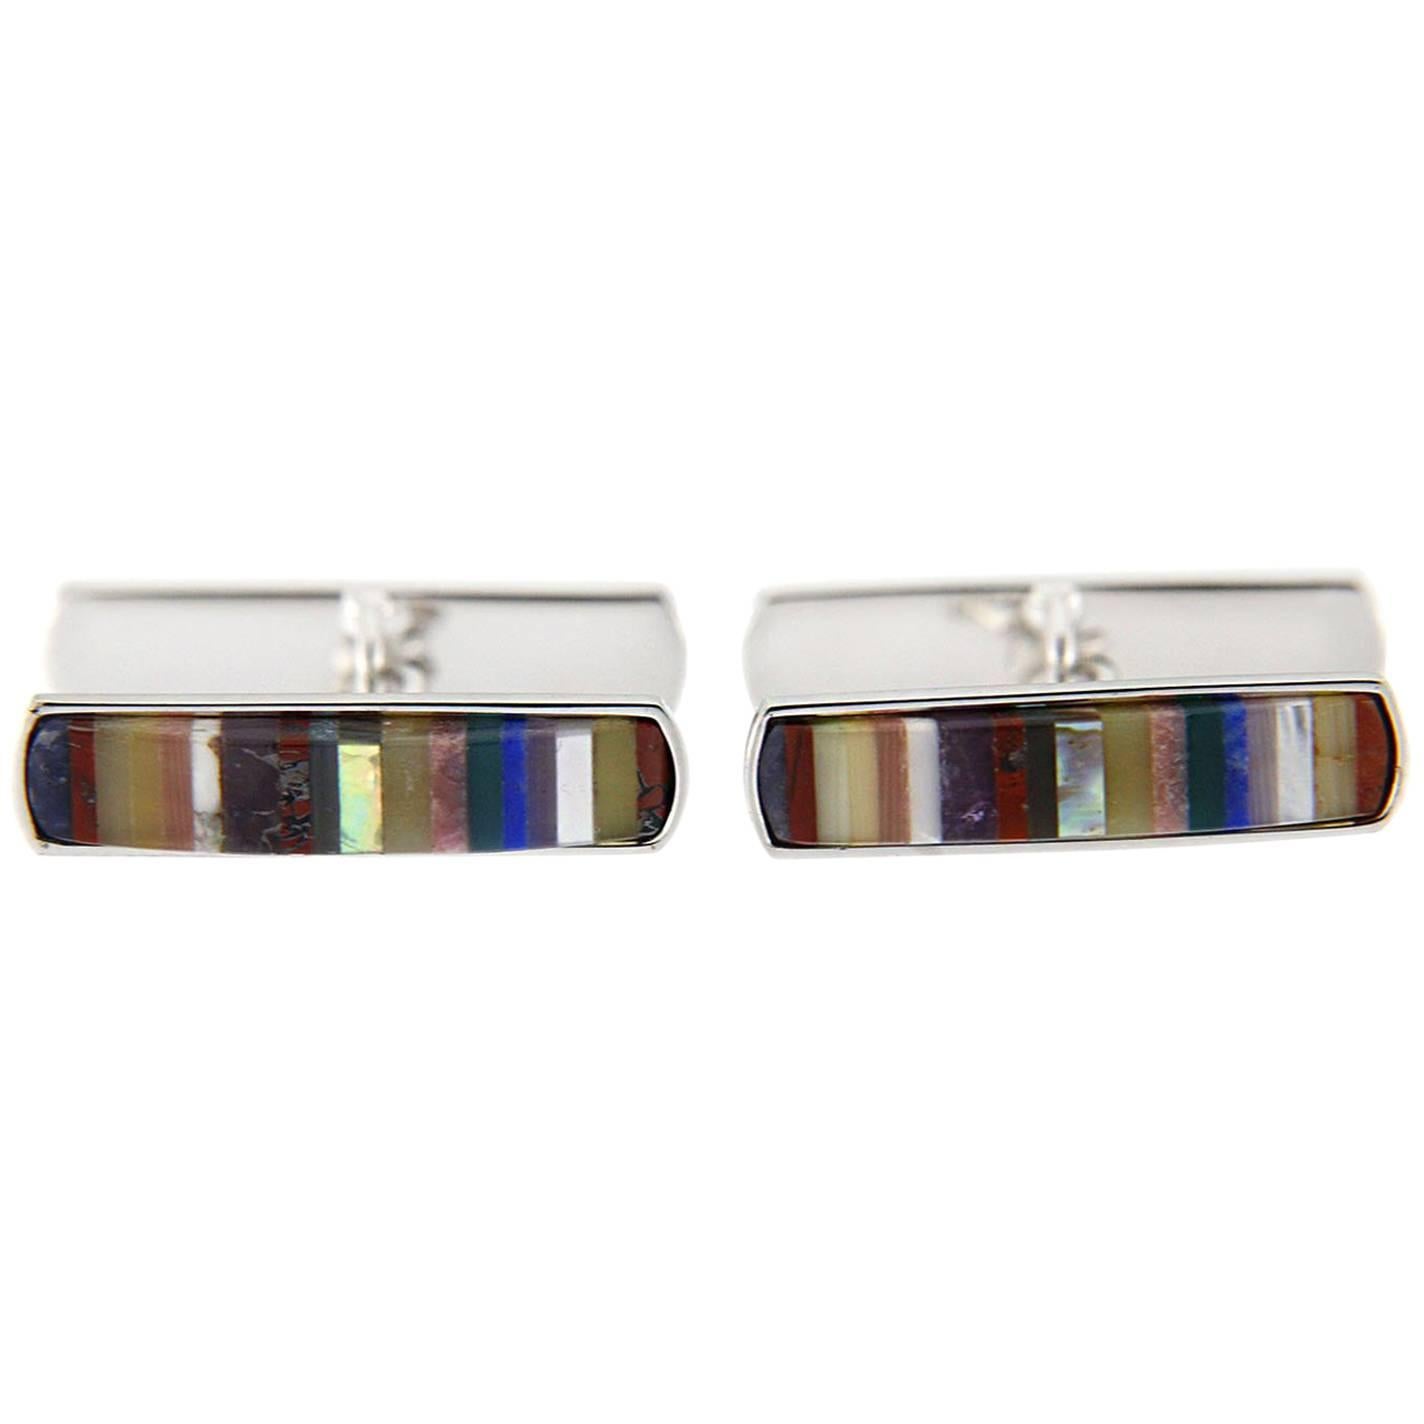 Jona Semi Precious Stone and Mother-of-Pearl Sterling Silver Cufflinks